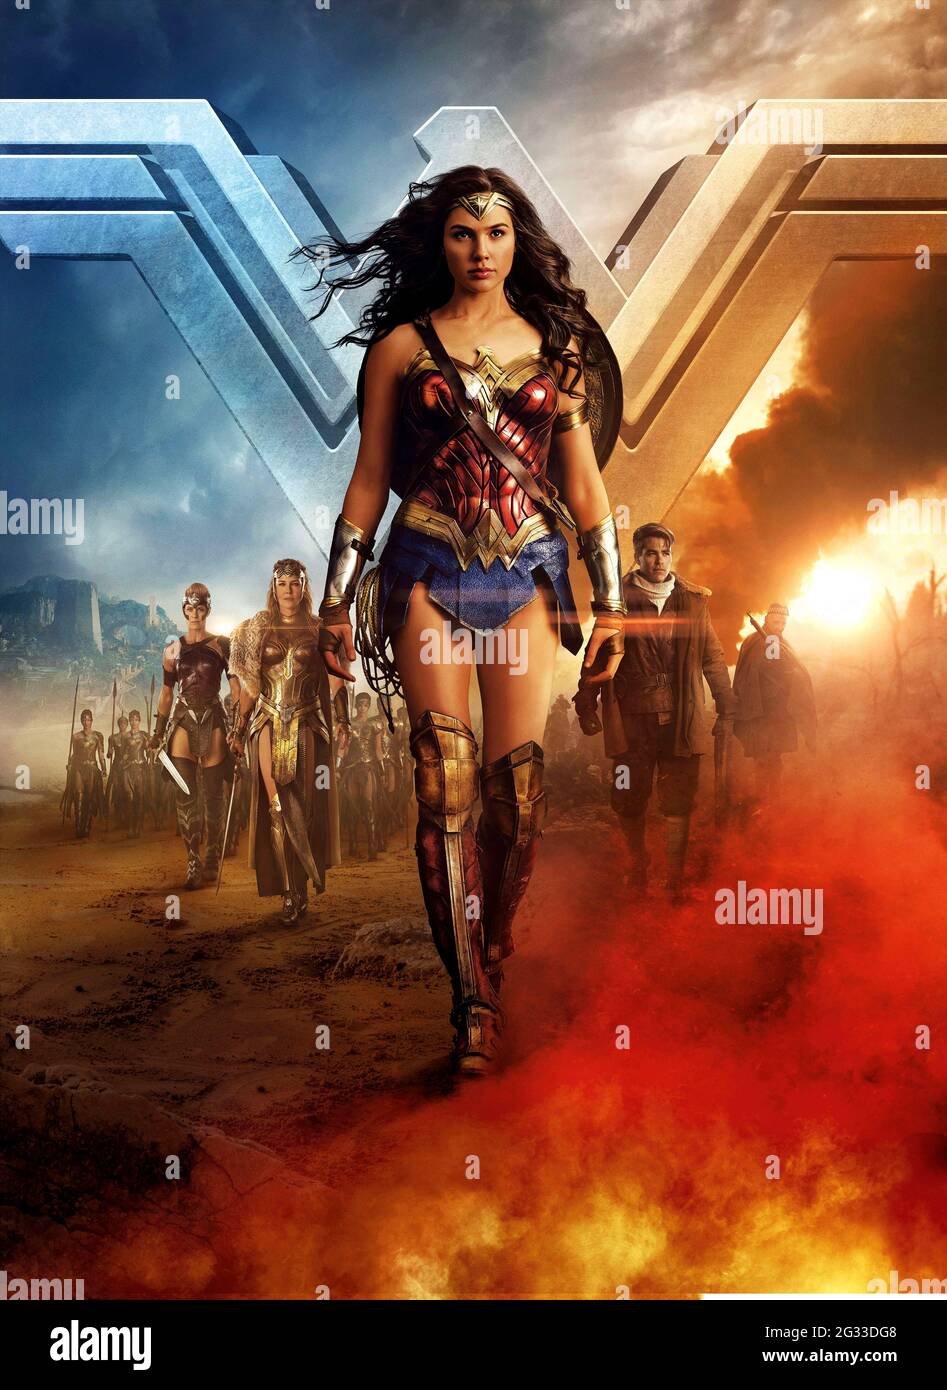 RELEASE DATE: June 2, 2017 TITLE: Wonder Woman STUDIO: DC Entertainment  DIRECTOR: Patty Jenkins PLOT: When a pilot crashes and tells of conflict in  the outside world, Diana, an Amazonian warrior in